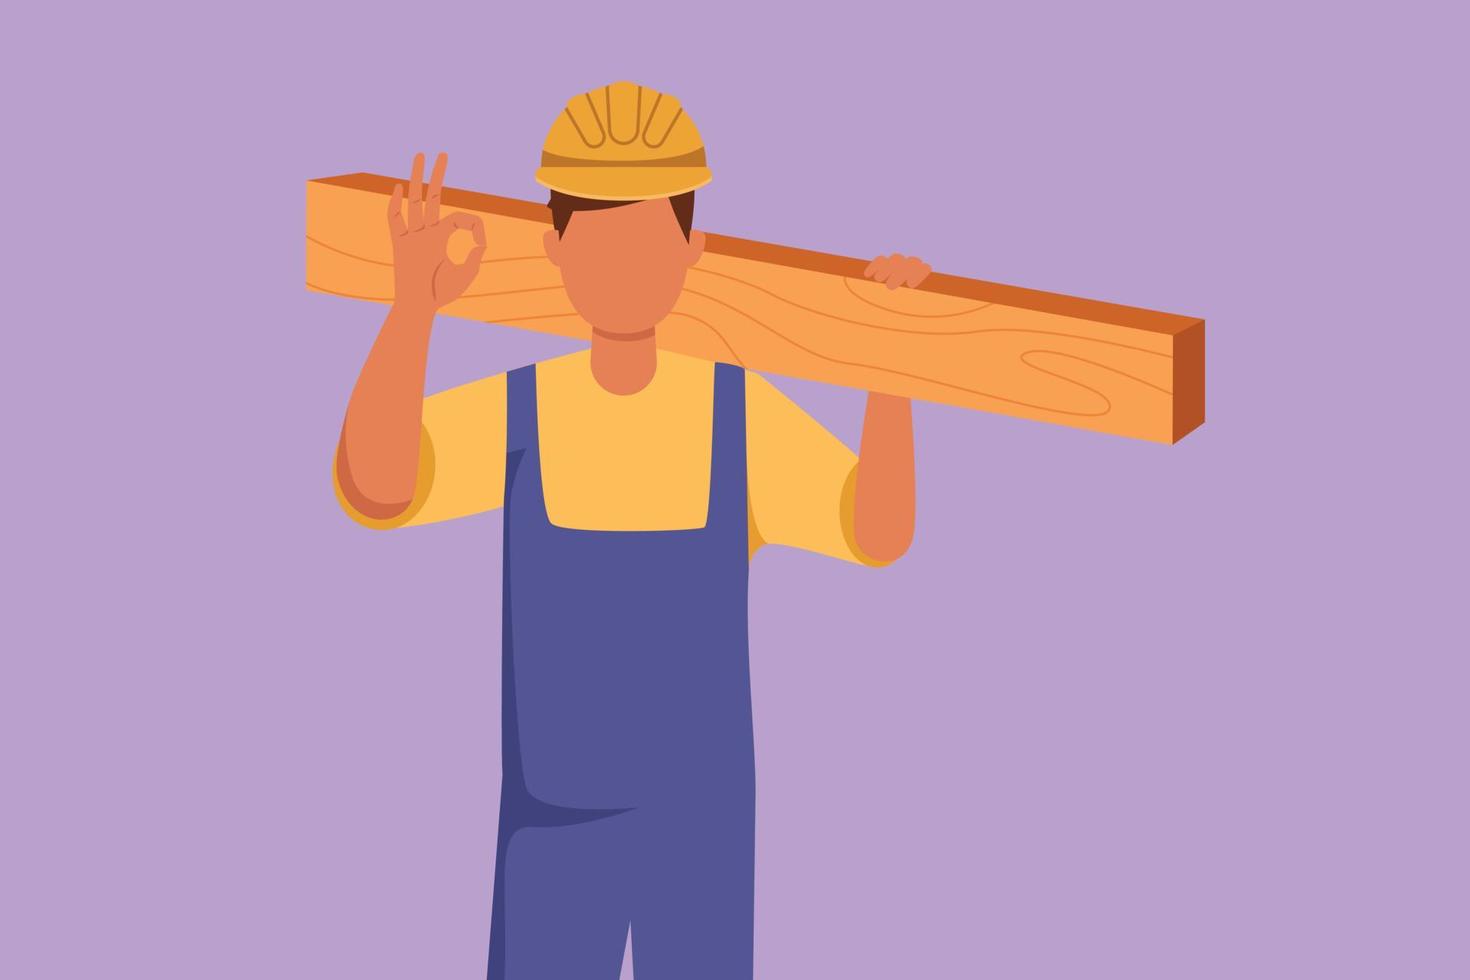 Cartoon flat style drawing male carpenter carrying wooden board with okay gesture and working in his workshop making wooden products. Skills in using carpentry tool. Graphic design vector illustration